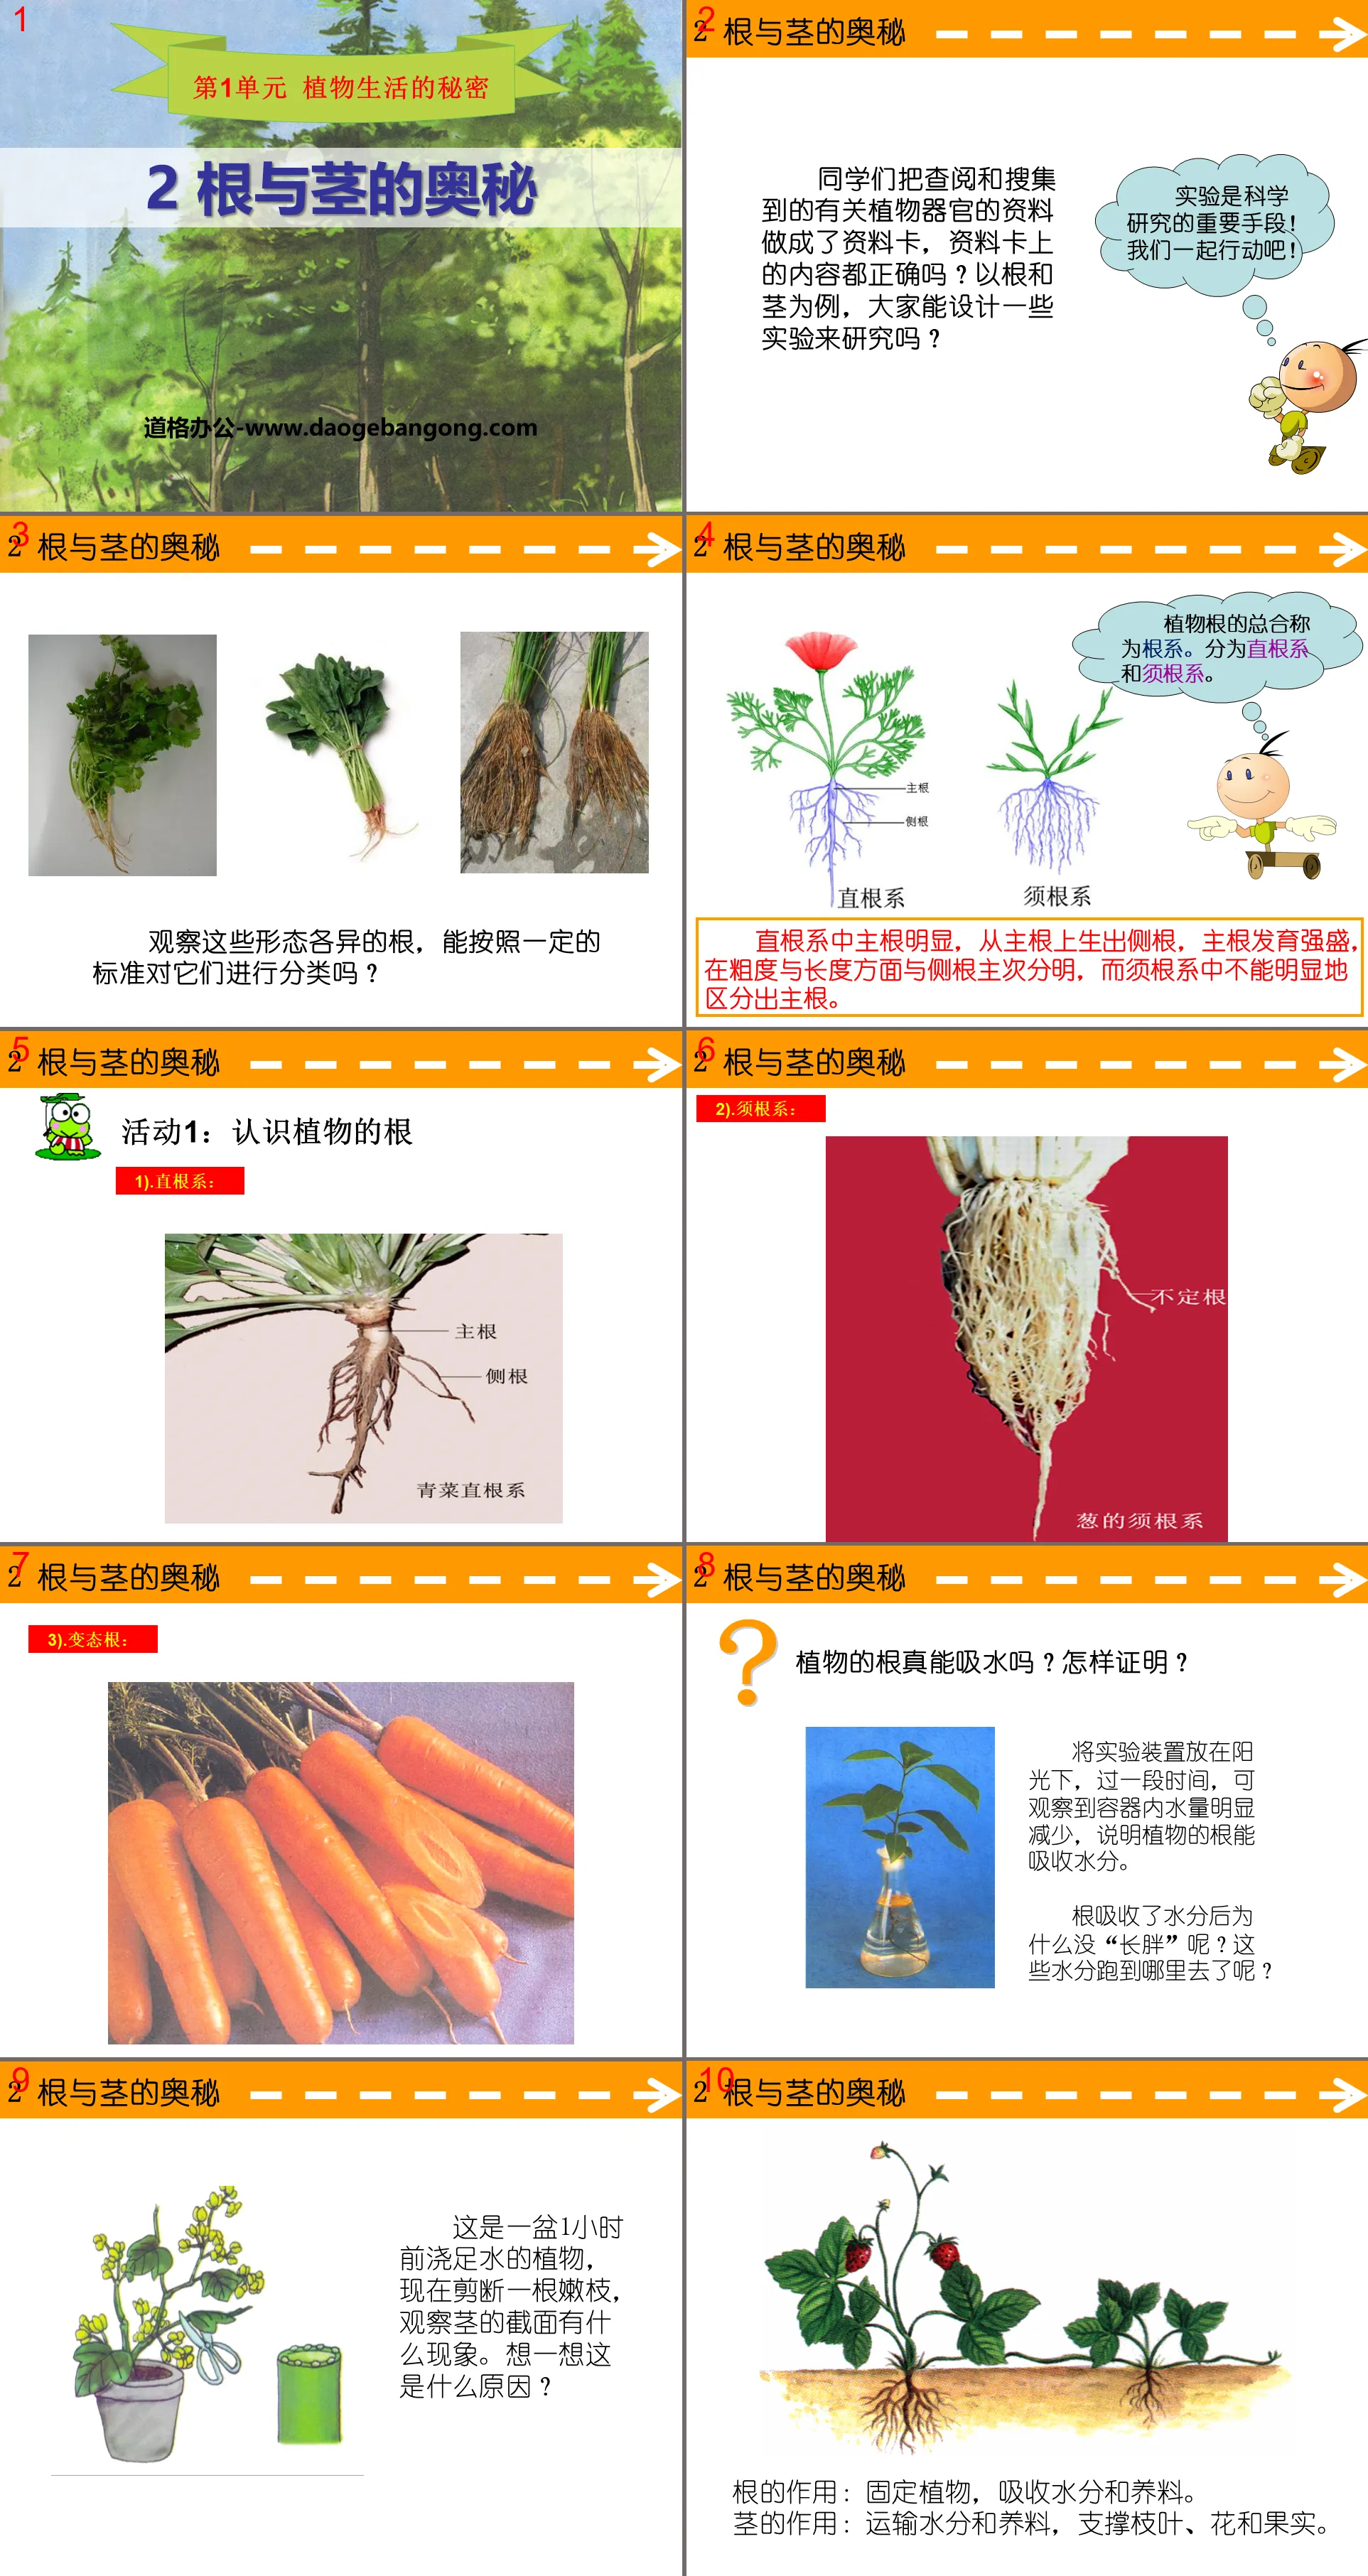 "The Mystery of Roots and Paths" PPT courseware on the secrets of plant life